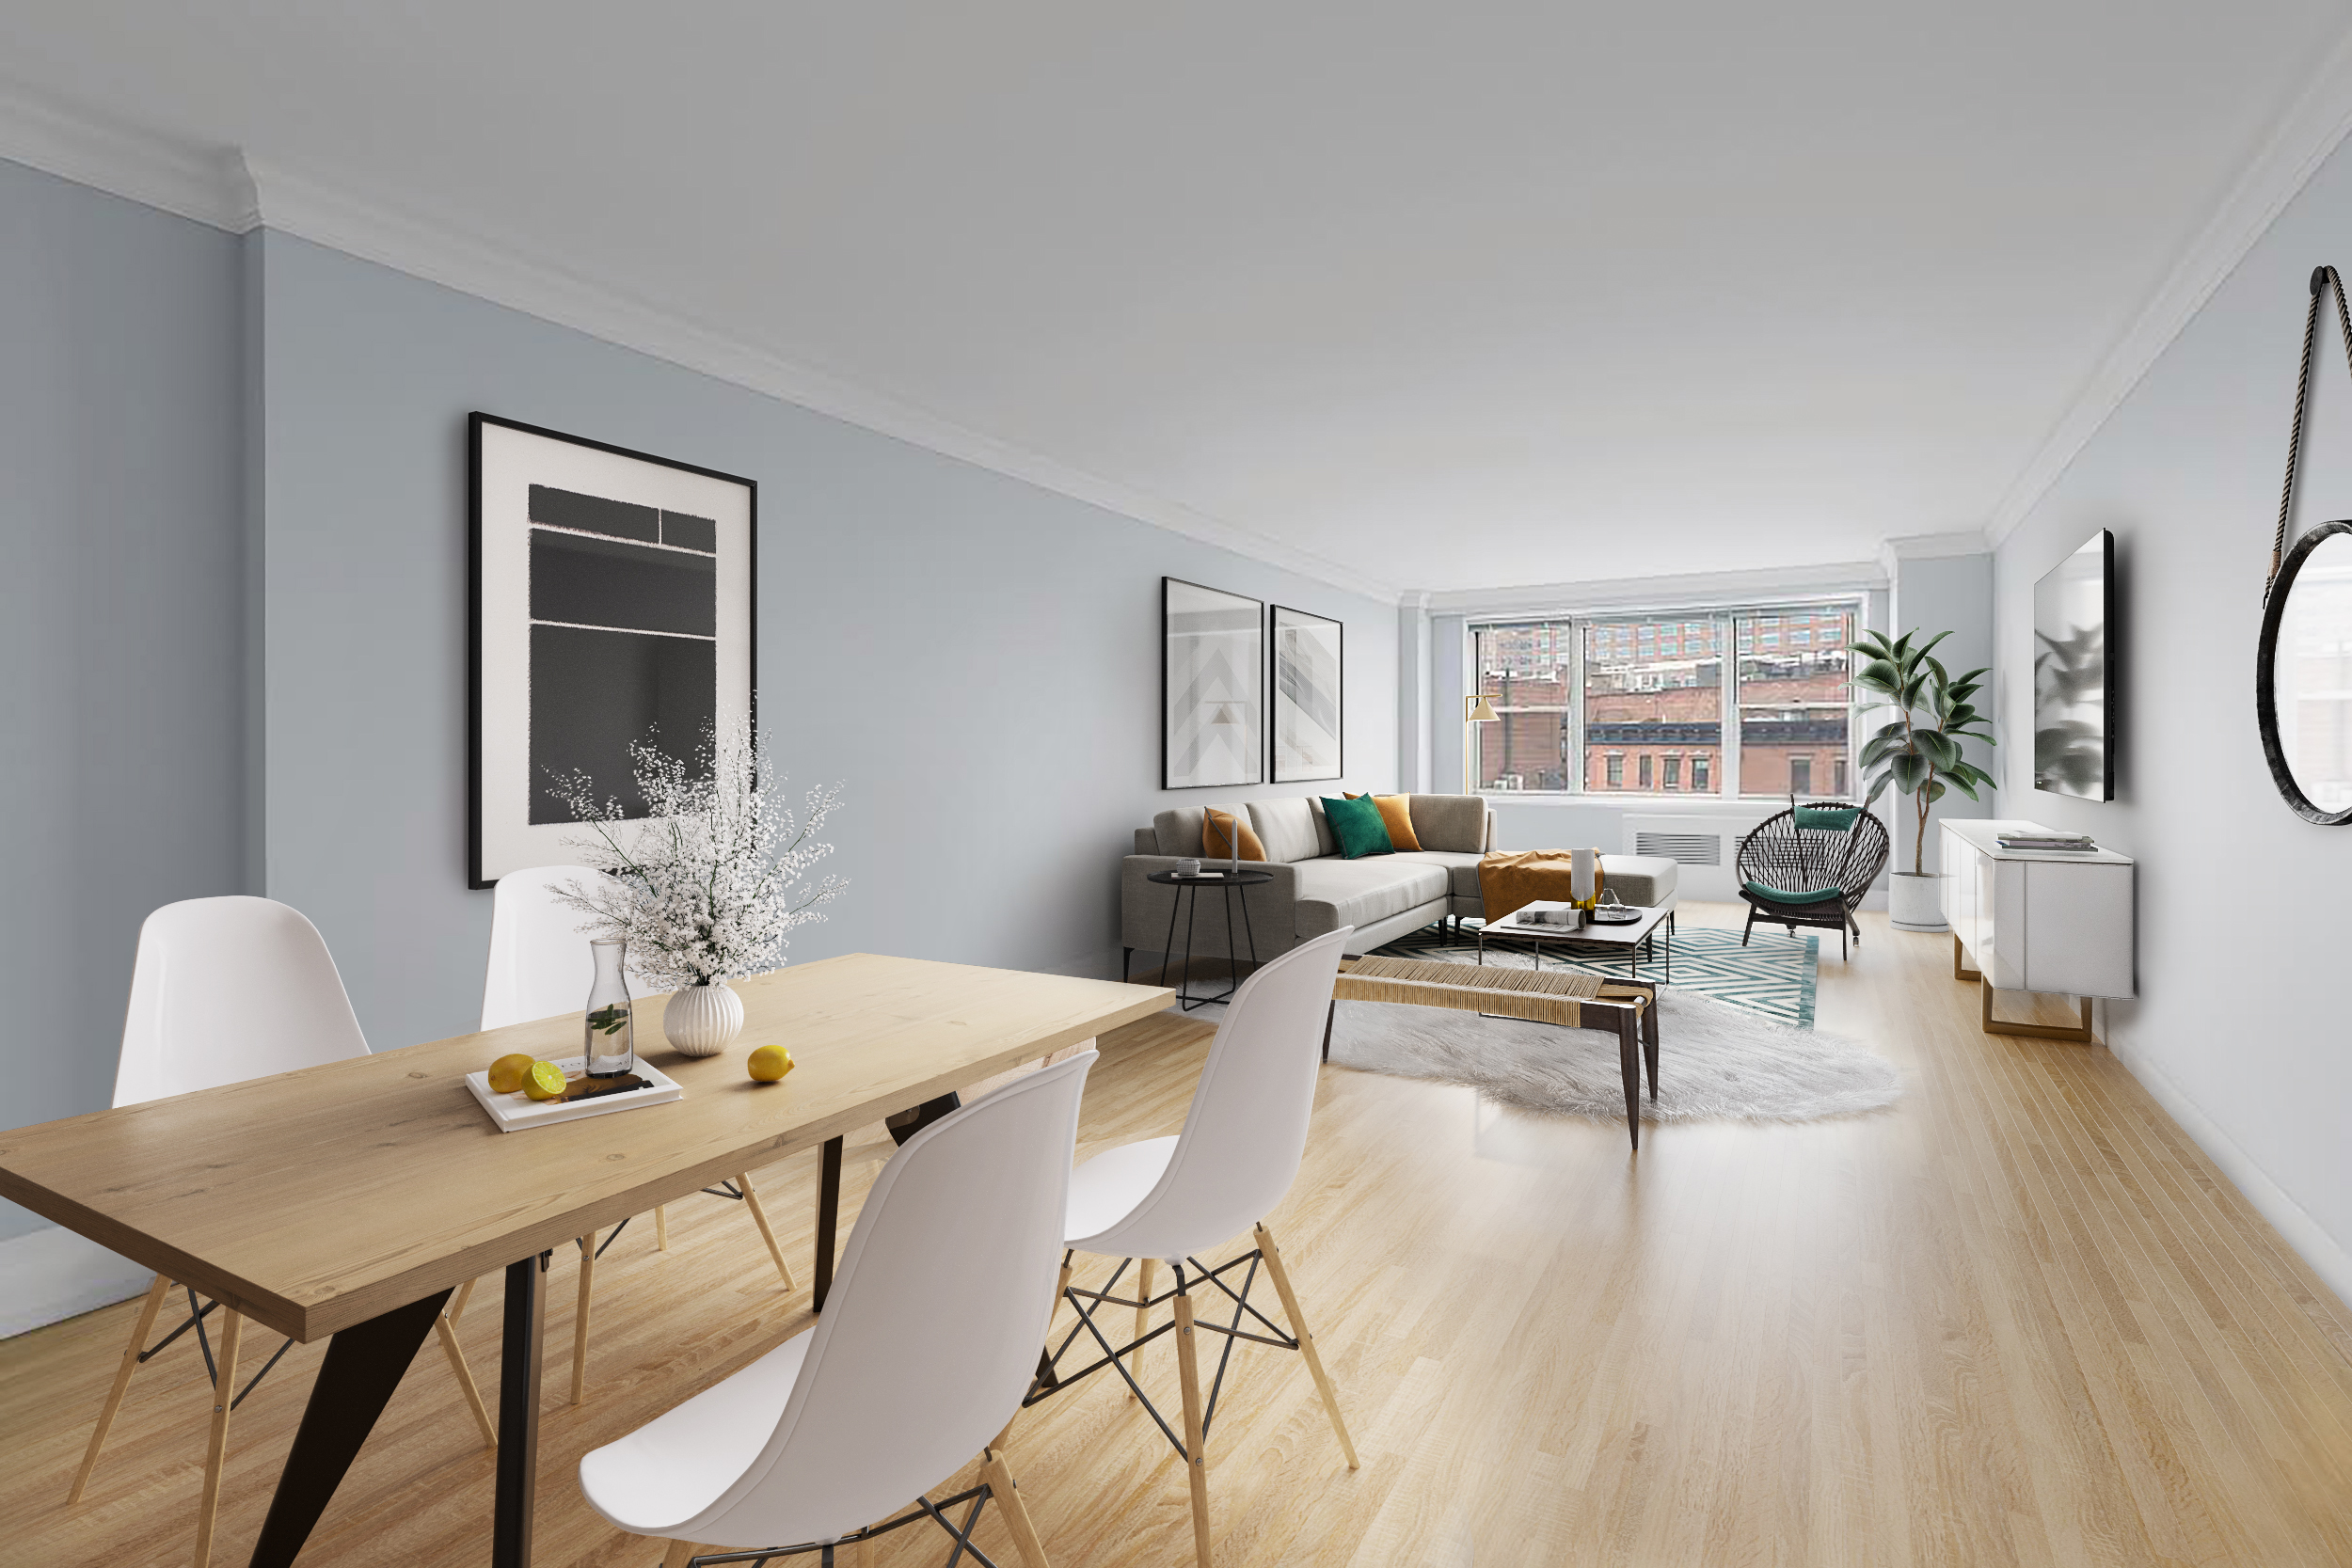 Andrew_14 Horatio St_#6H_Living_dining_staged_IK_corrected.jpg